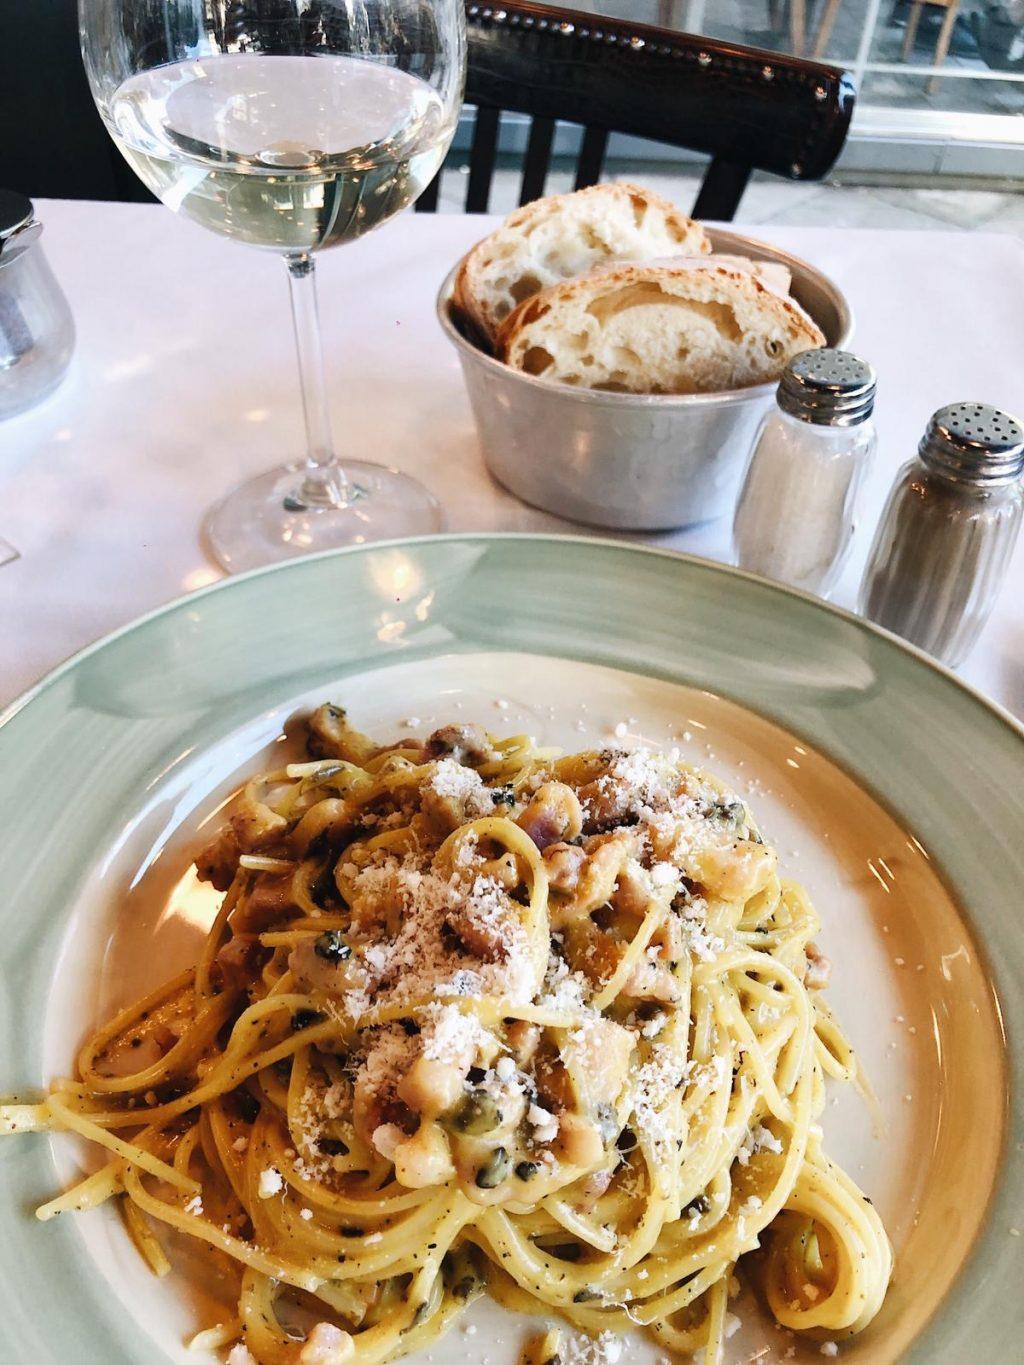 Camryn Moss' favorite meal from Trattoria Za Za, a restaurant in Florence, is spaghetti carbonara with truffle. Photo courtesy of Camryn Moss.